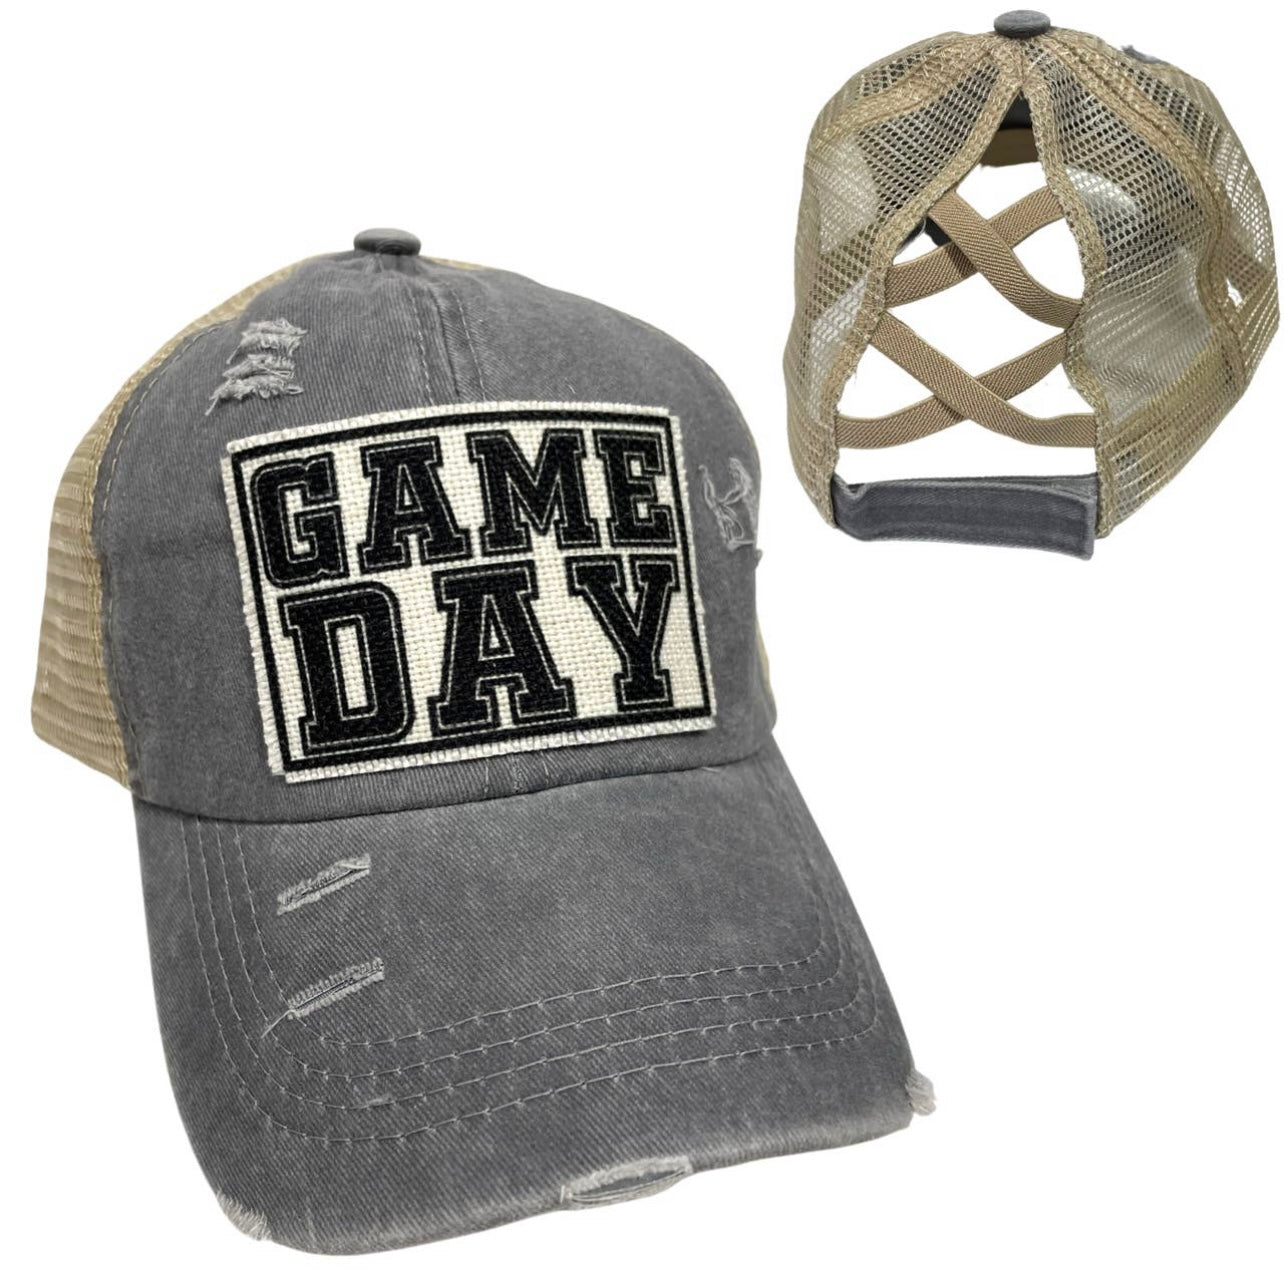 GAME DAY CRISS-CROSS PONYTAIL HAT